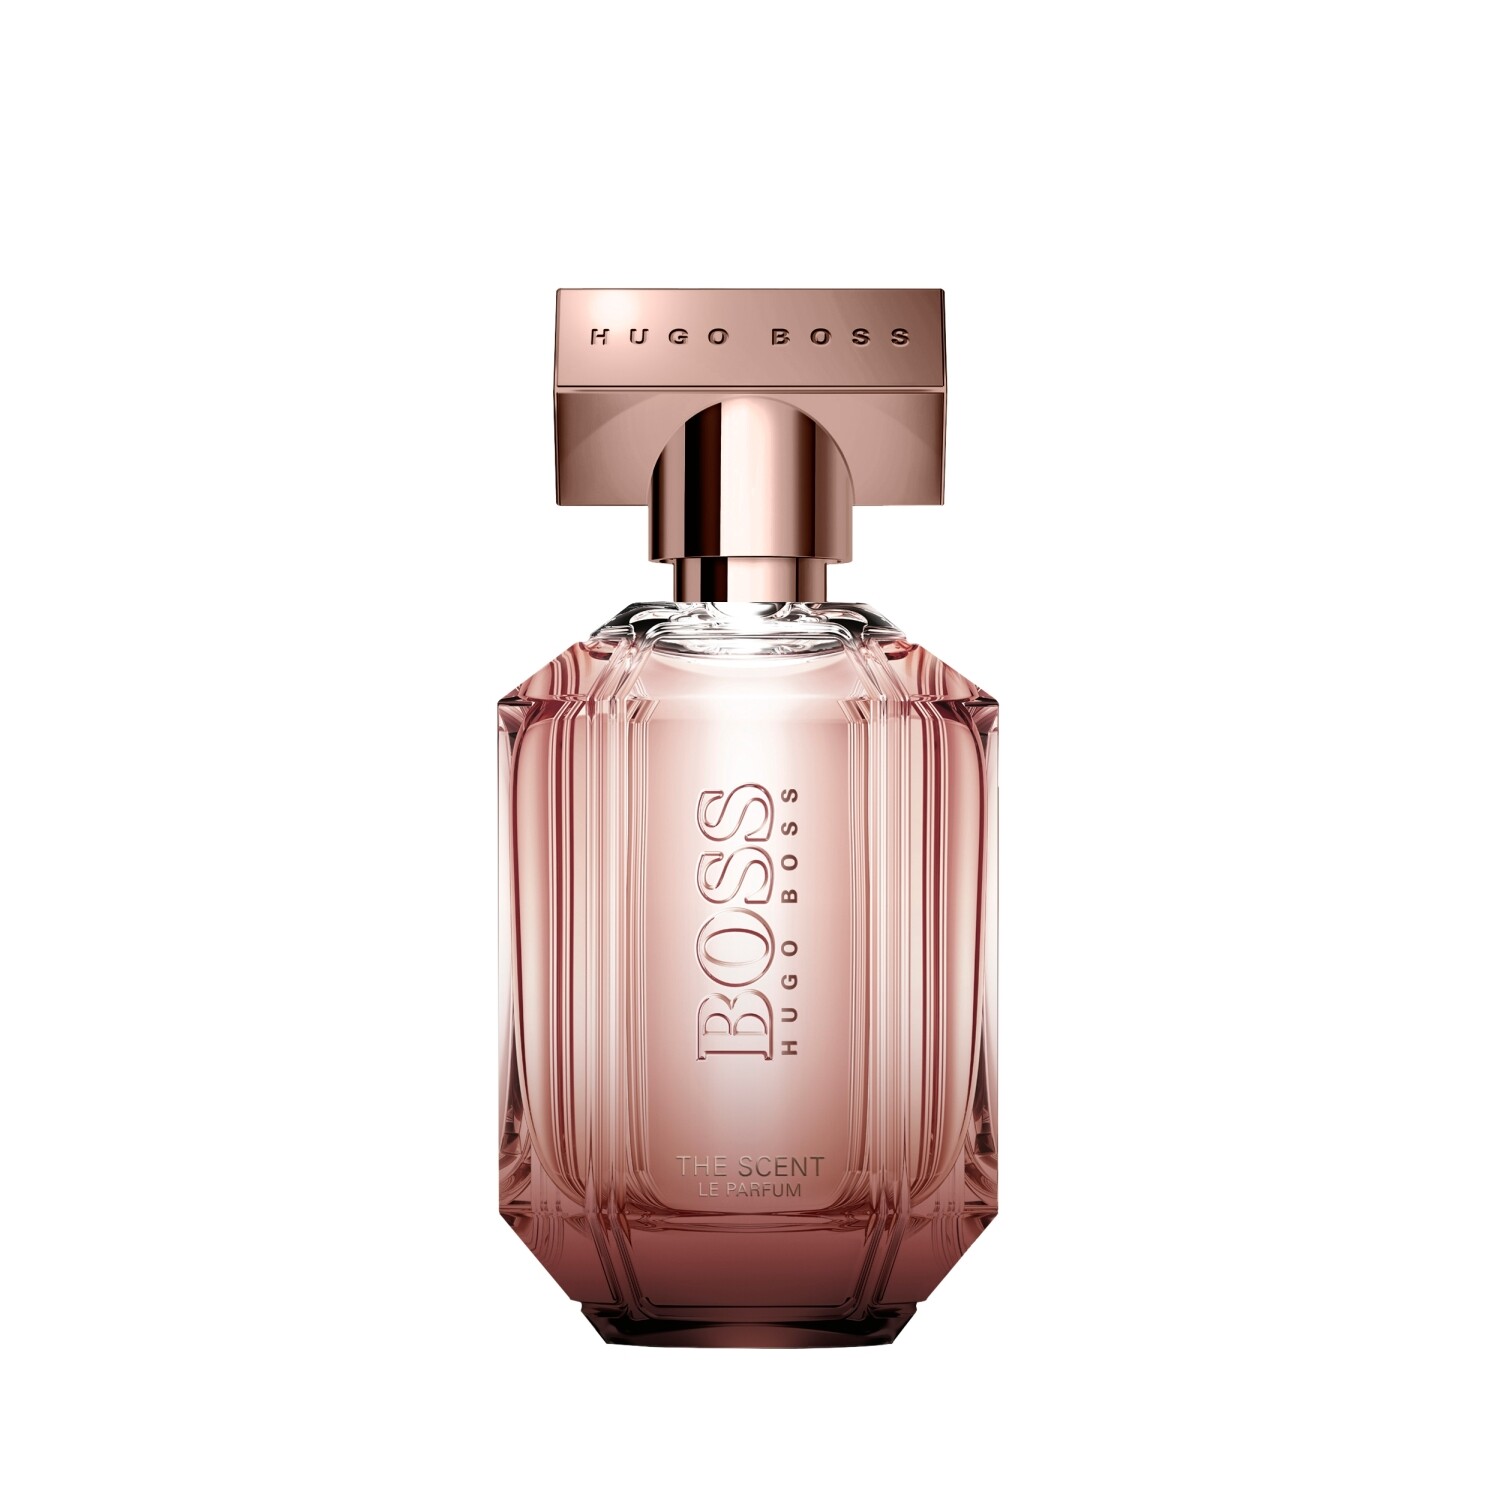 Hugo Boss The Scent Le Parfum For Her 50ml